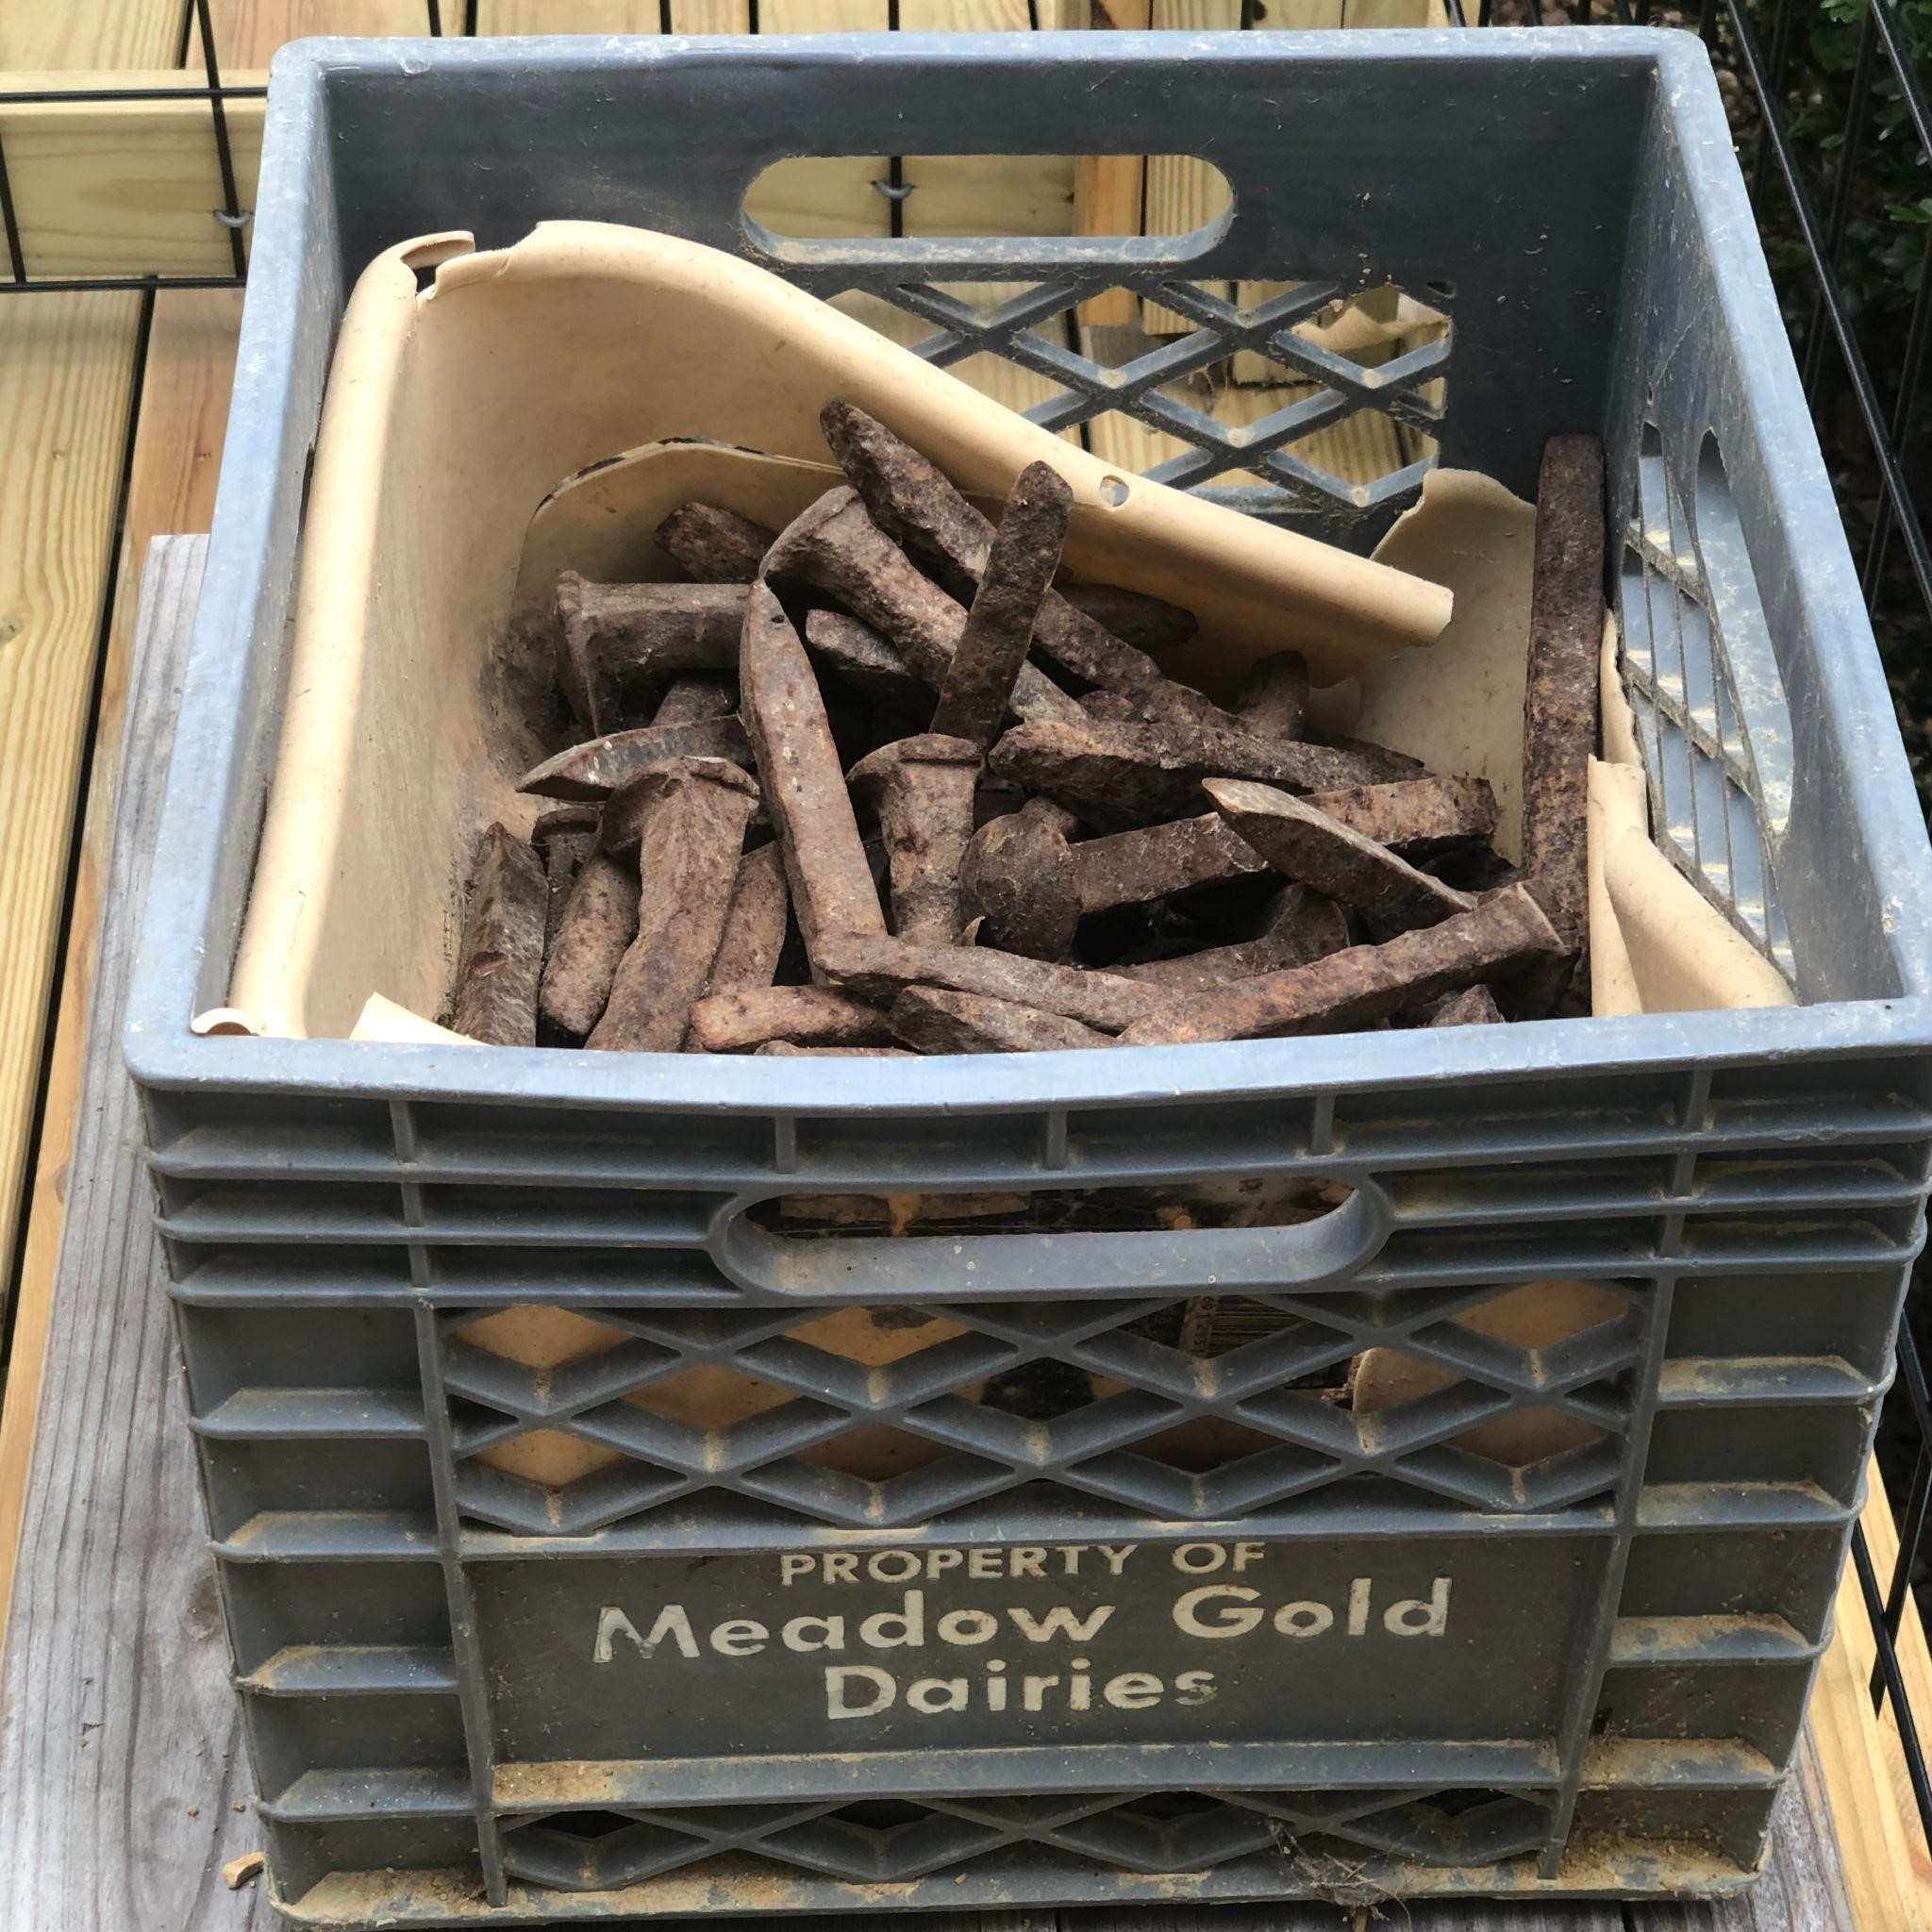 Meadow Gold Dairies Crate Full of Railroad Spikes